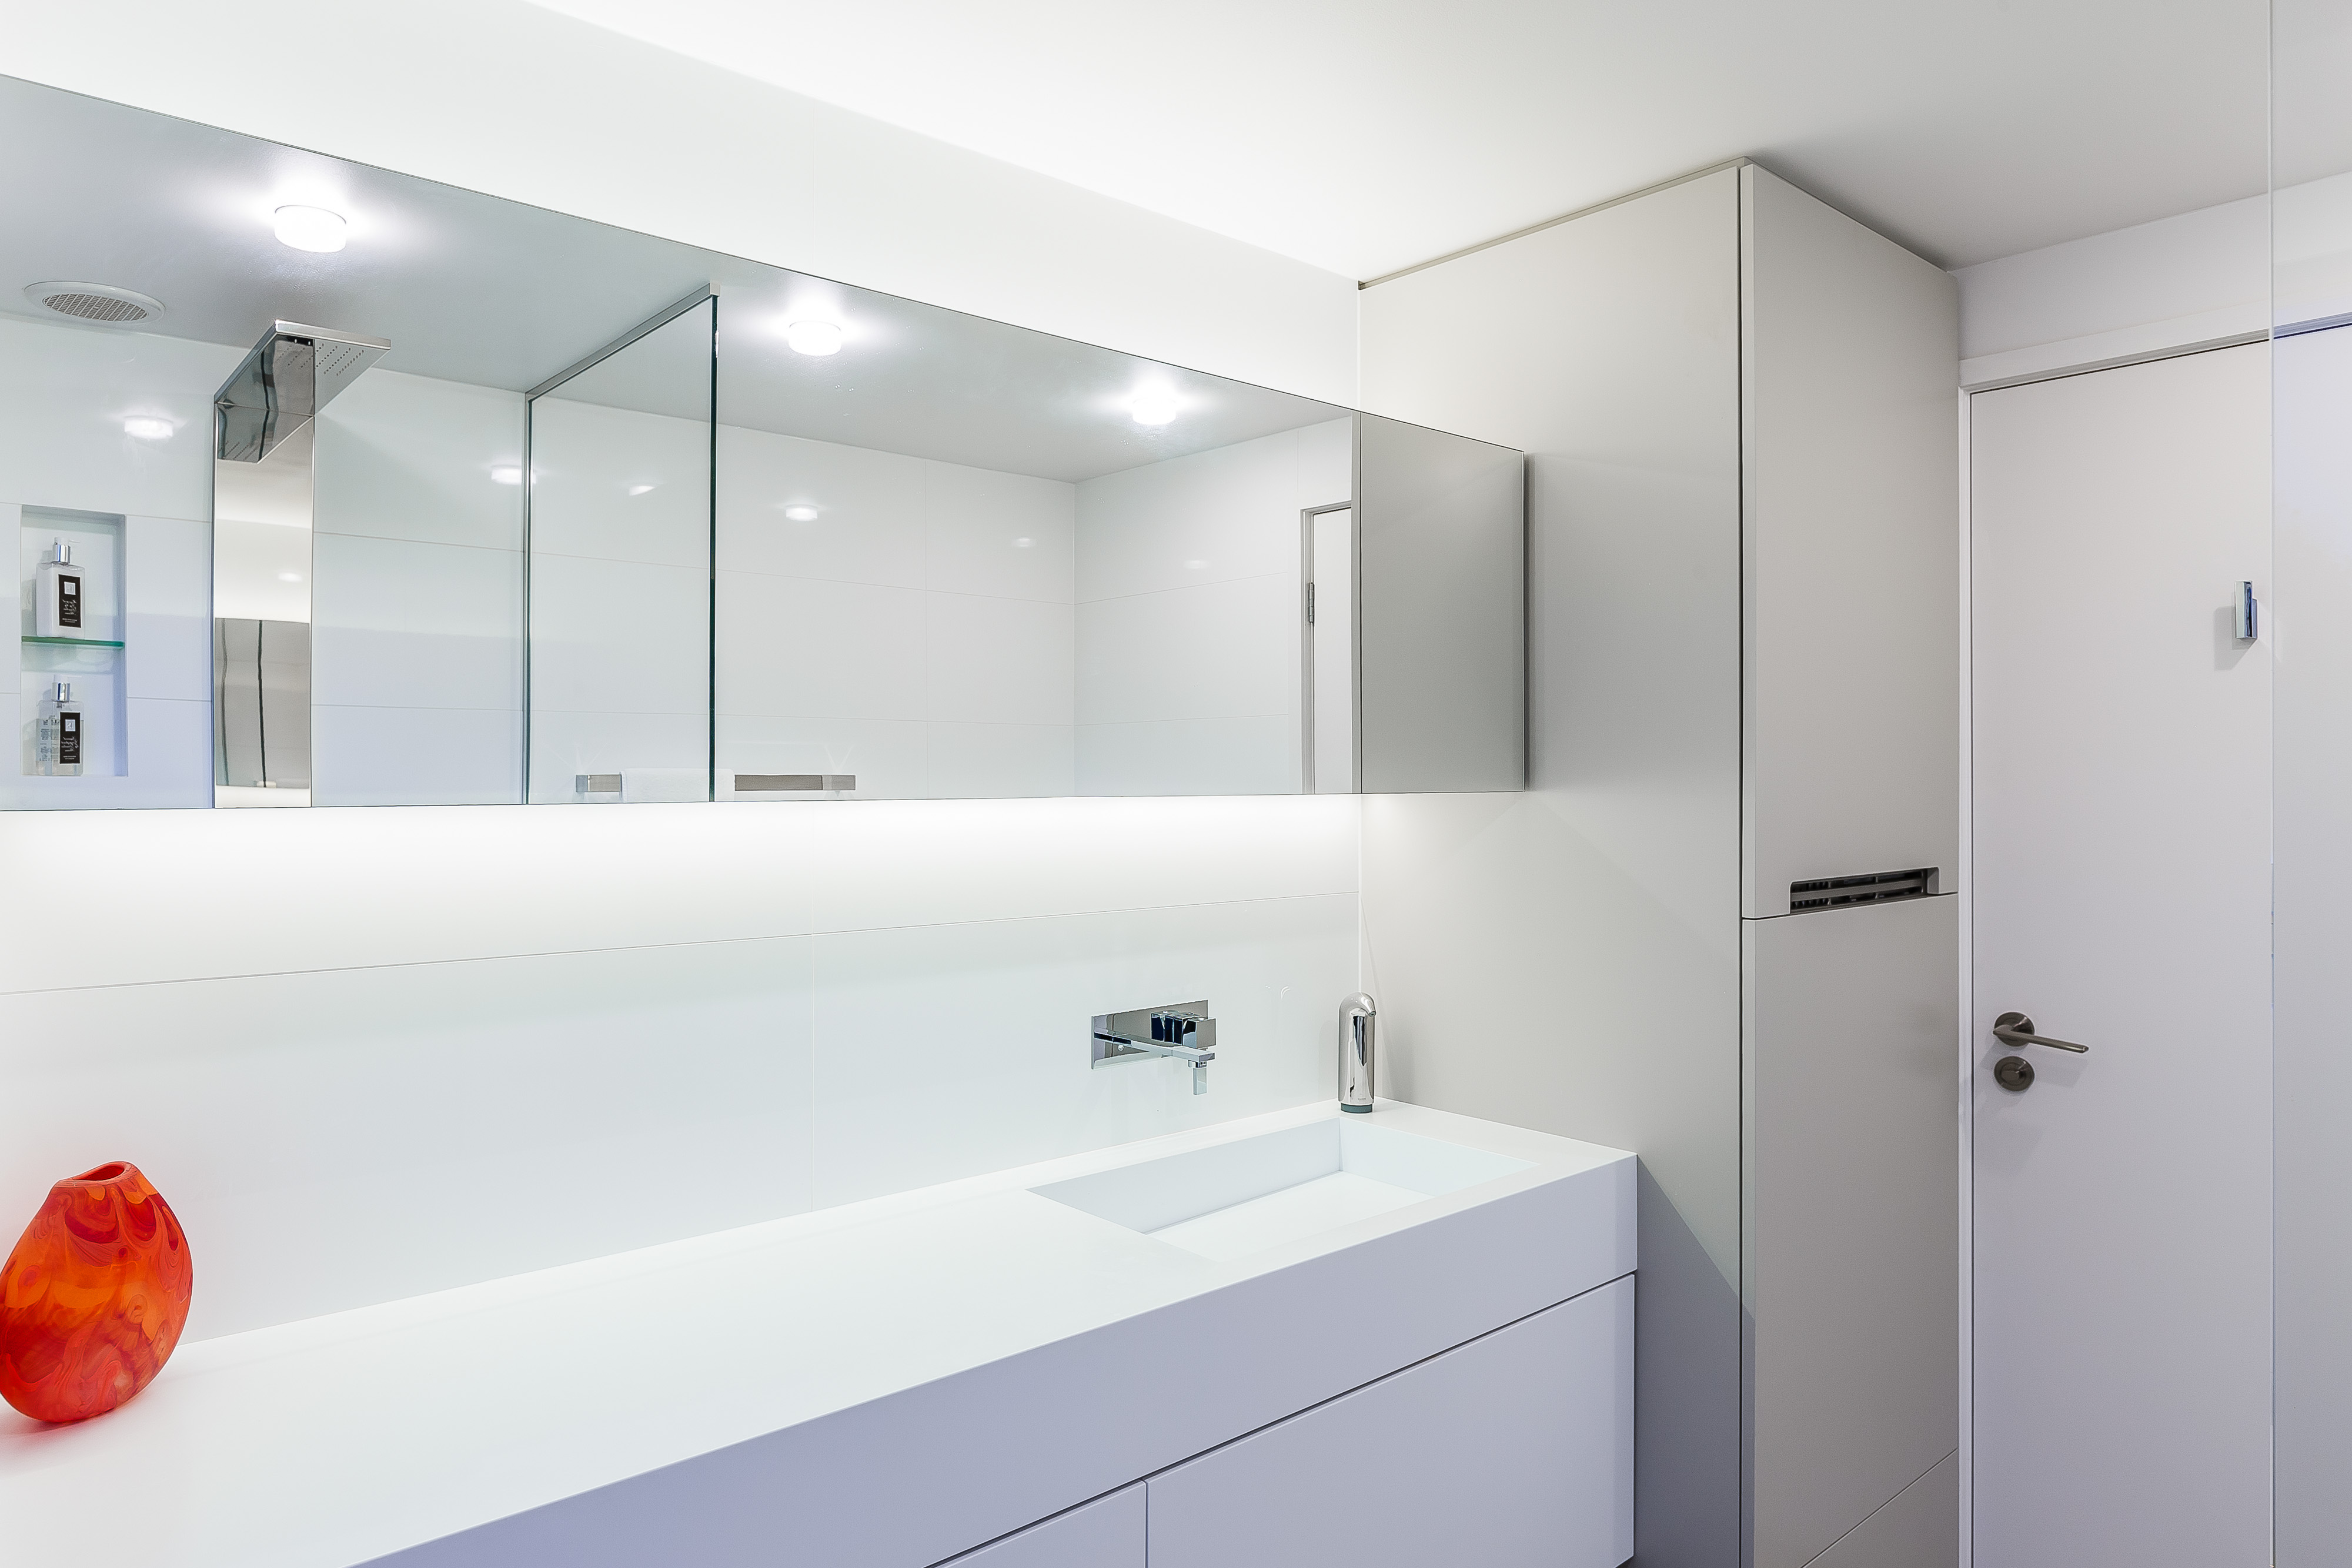 Corian S Sophisticated Surfaces For Bathrooms Eboss